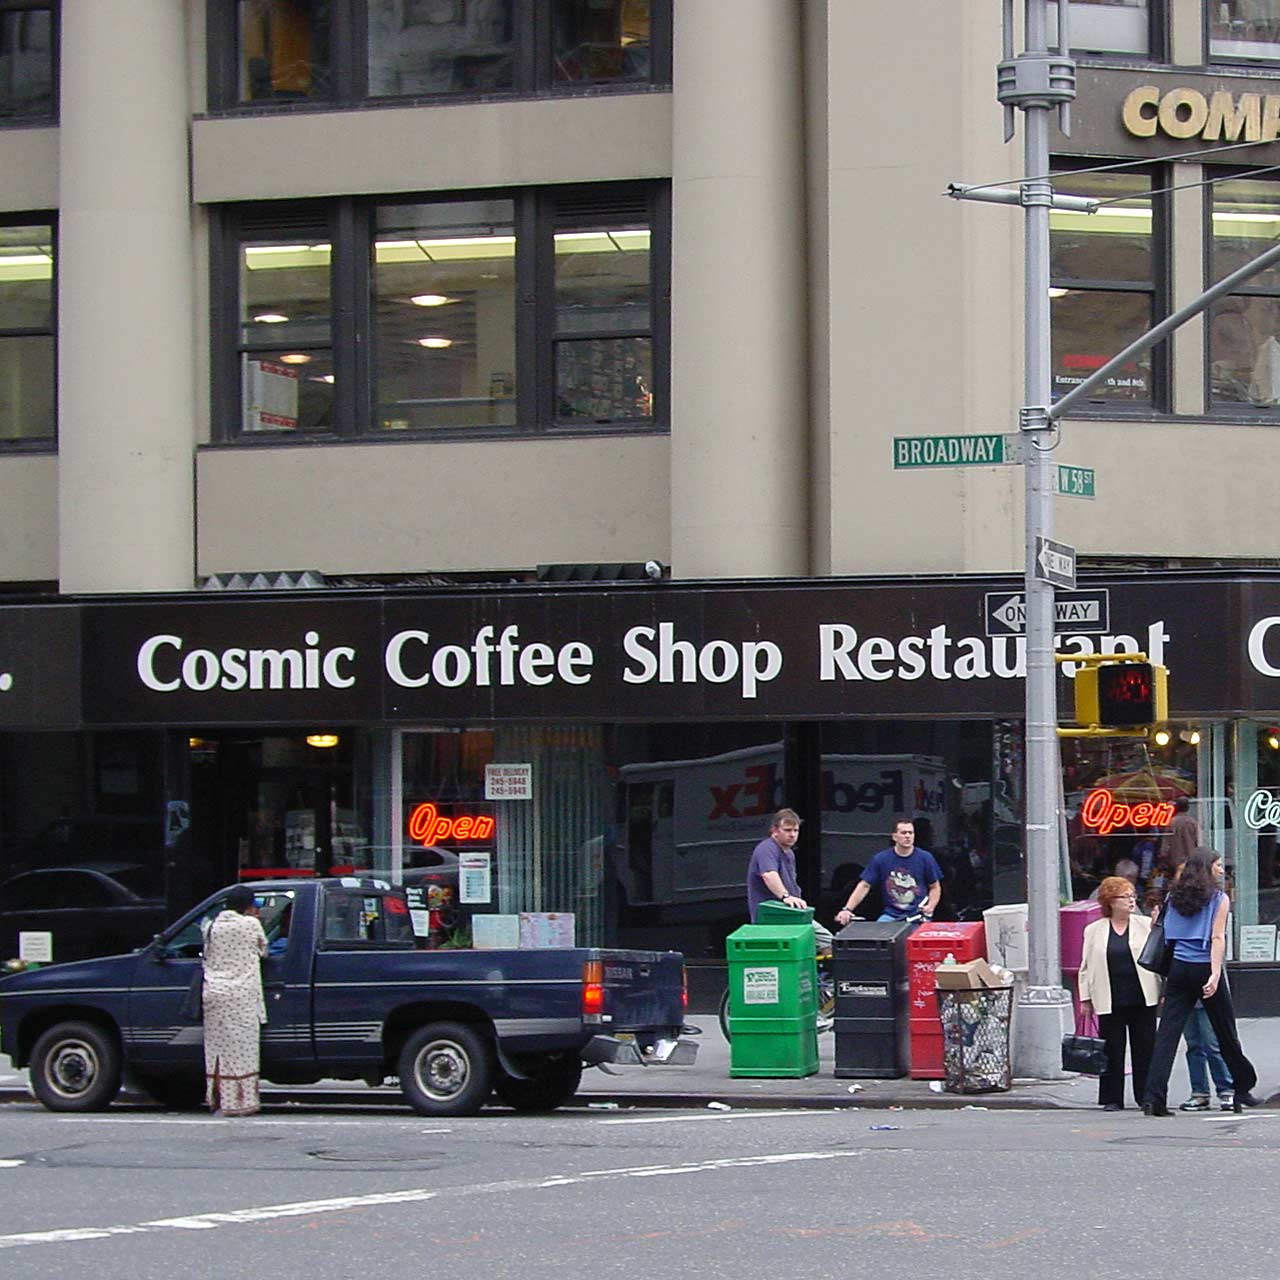 The Cosmic Coffee Shop storefront, with a prominant sign that faces 58th Street and Broadway.